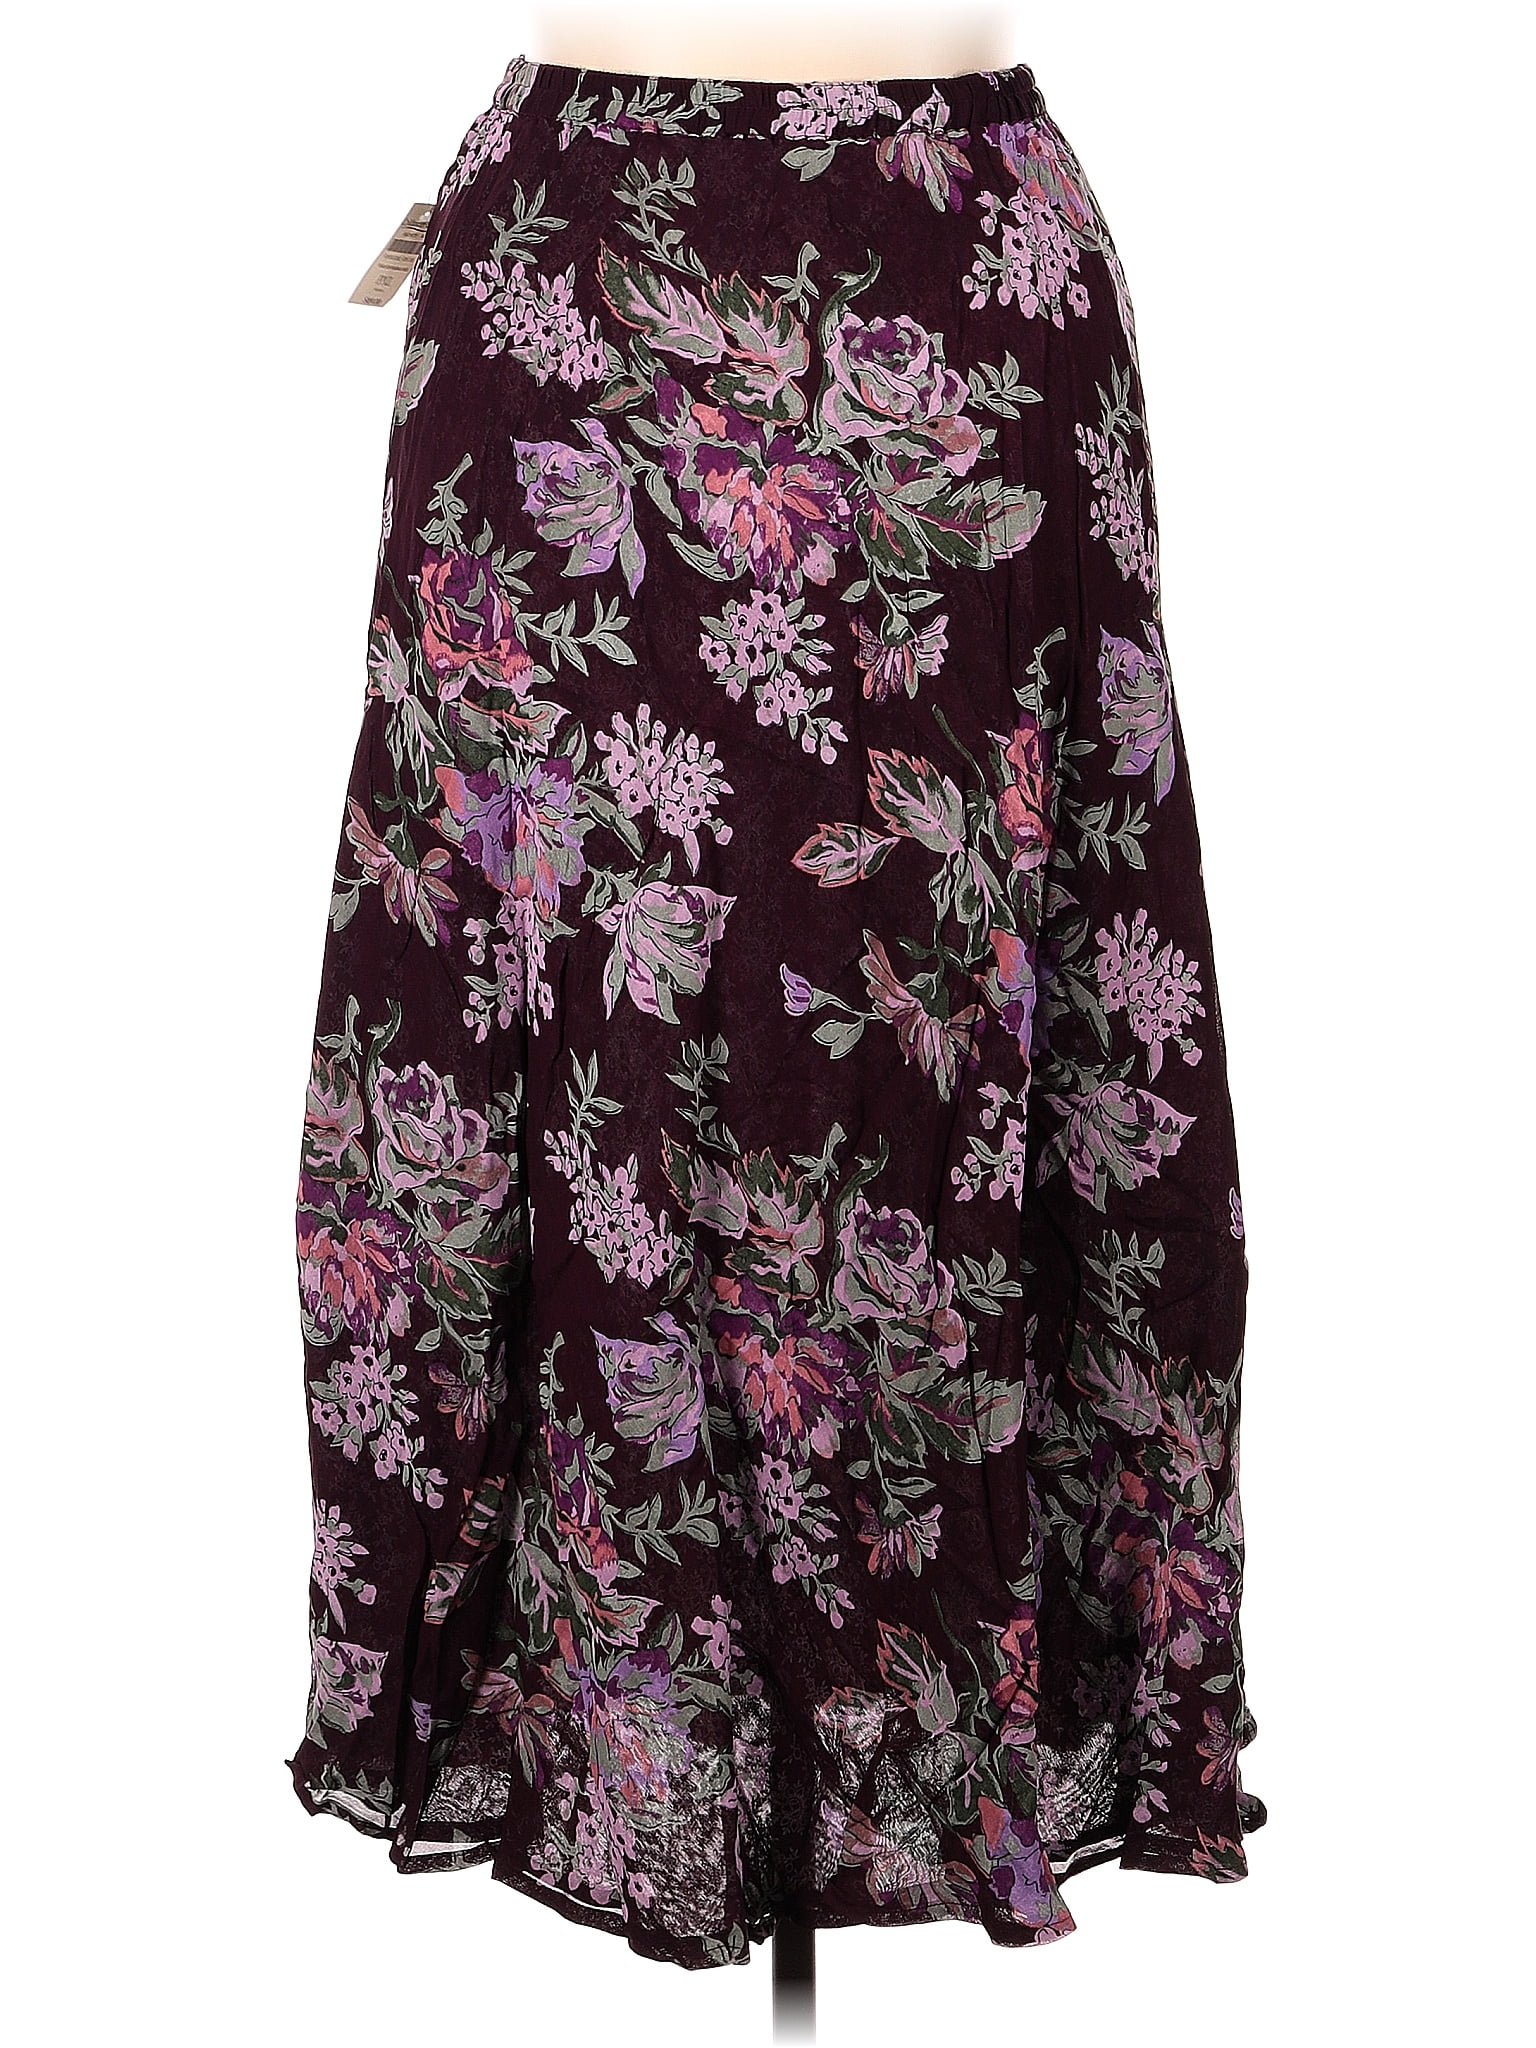 Coldwater Creek 100% Rayon Floral Purple Casual Skirt Size XL (Petite) -  79% off